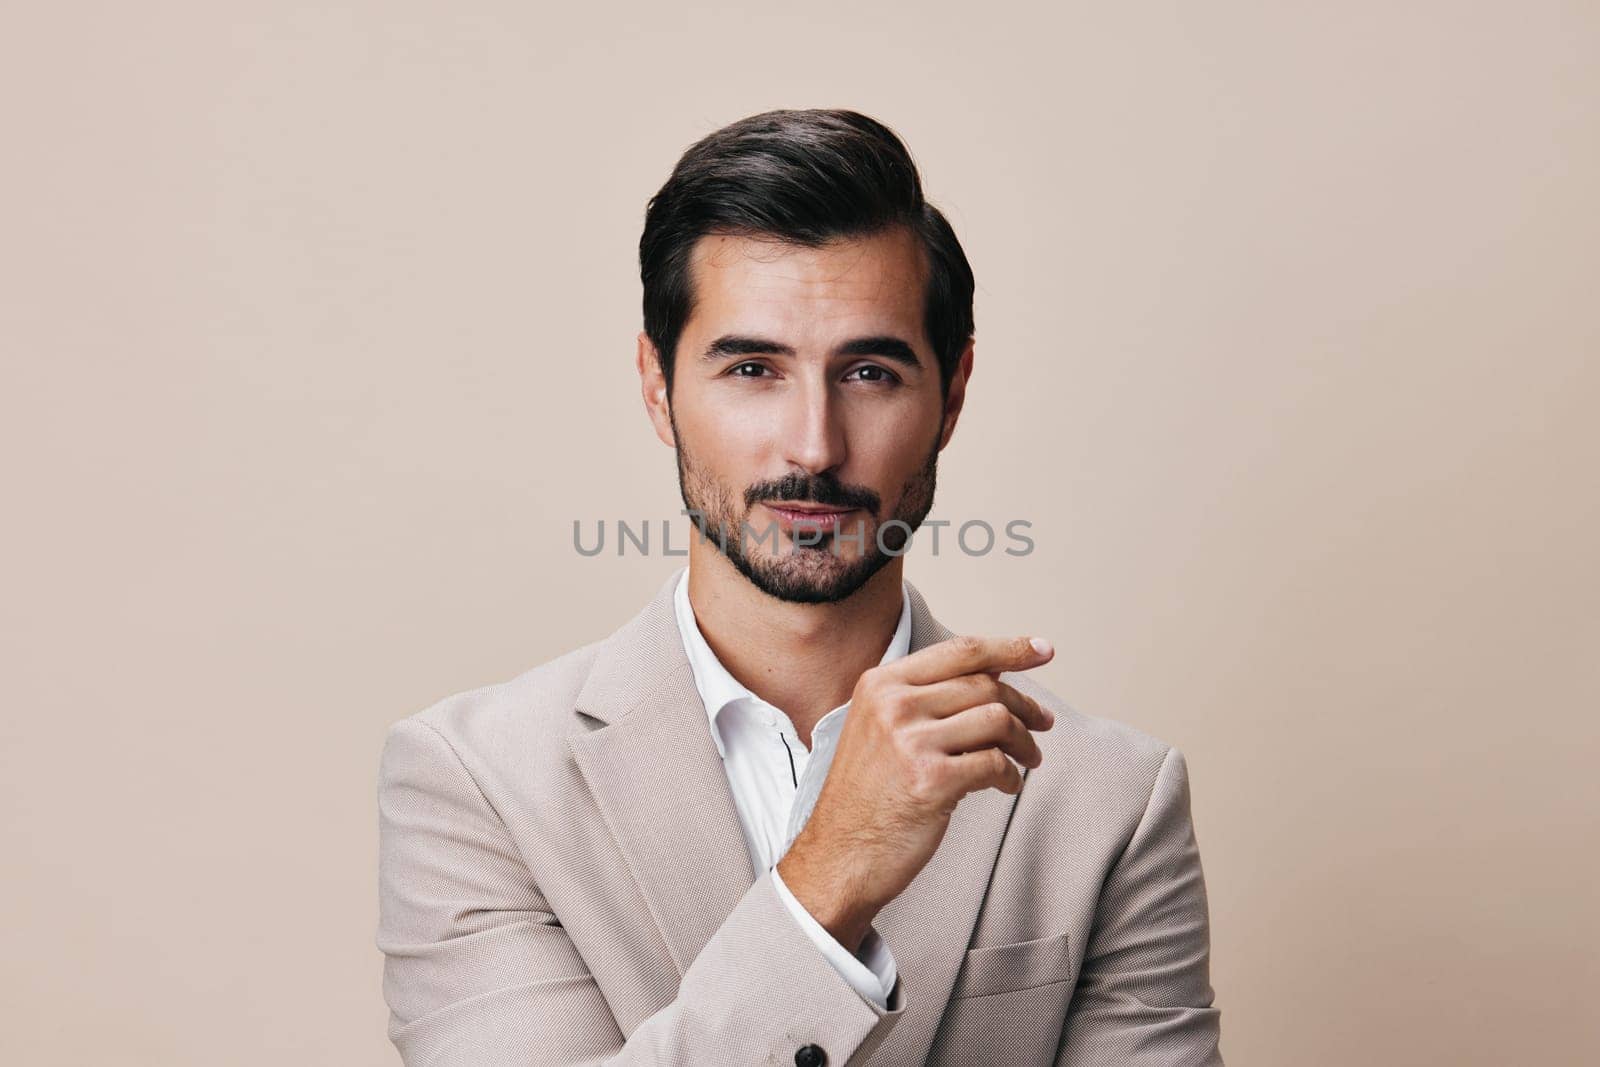 man handsome beard grey job beige person portrait businessman copyspace smiling young executive sexy occupation business fashion happy office attractive suit